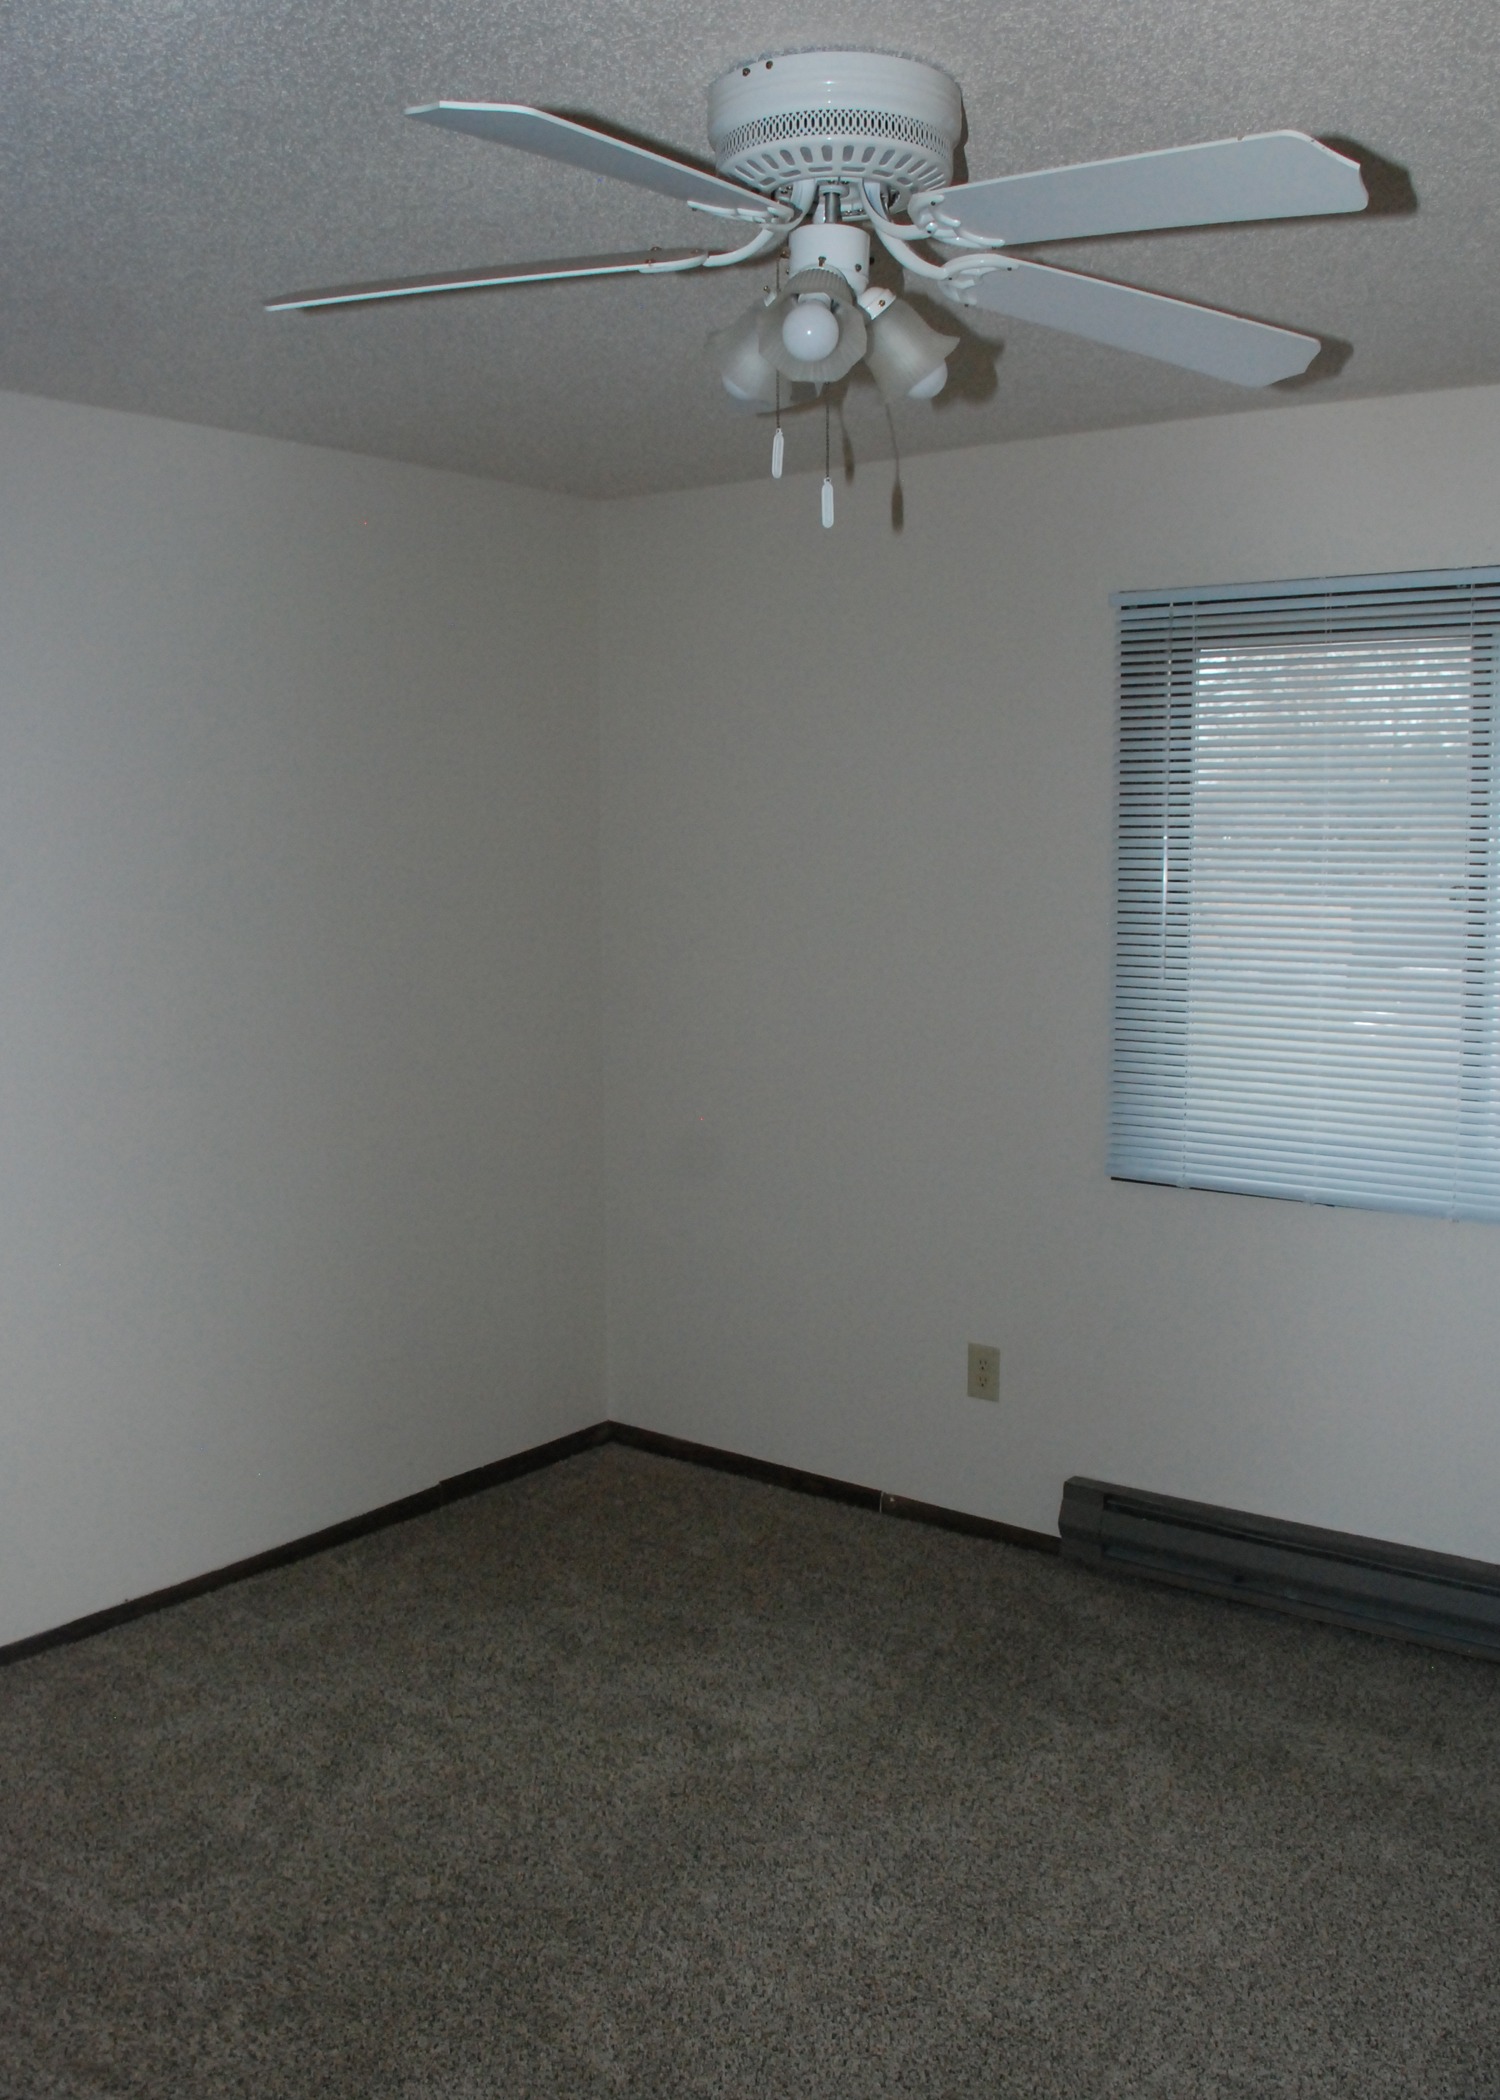 Bedroom in a low income apartment